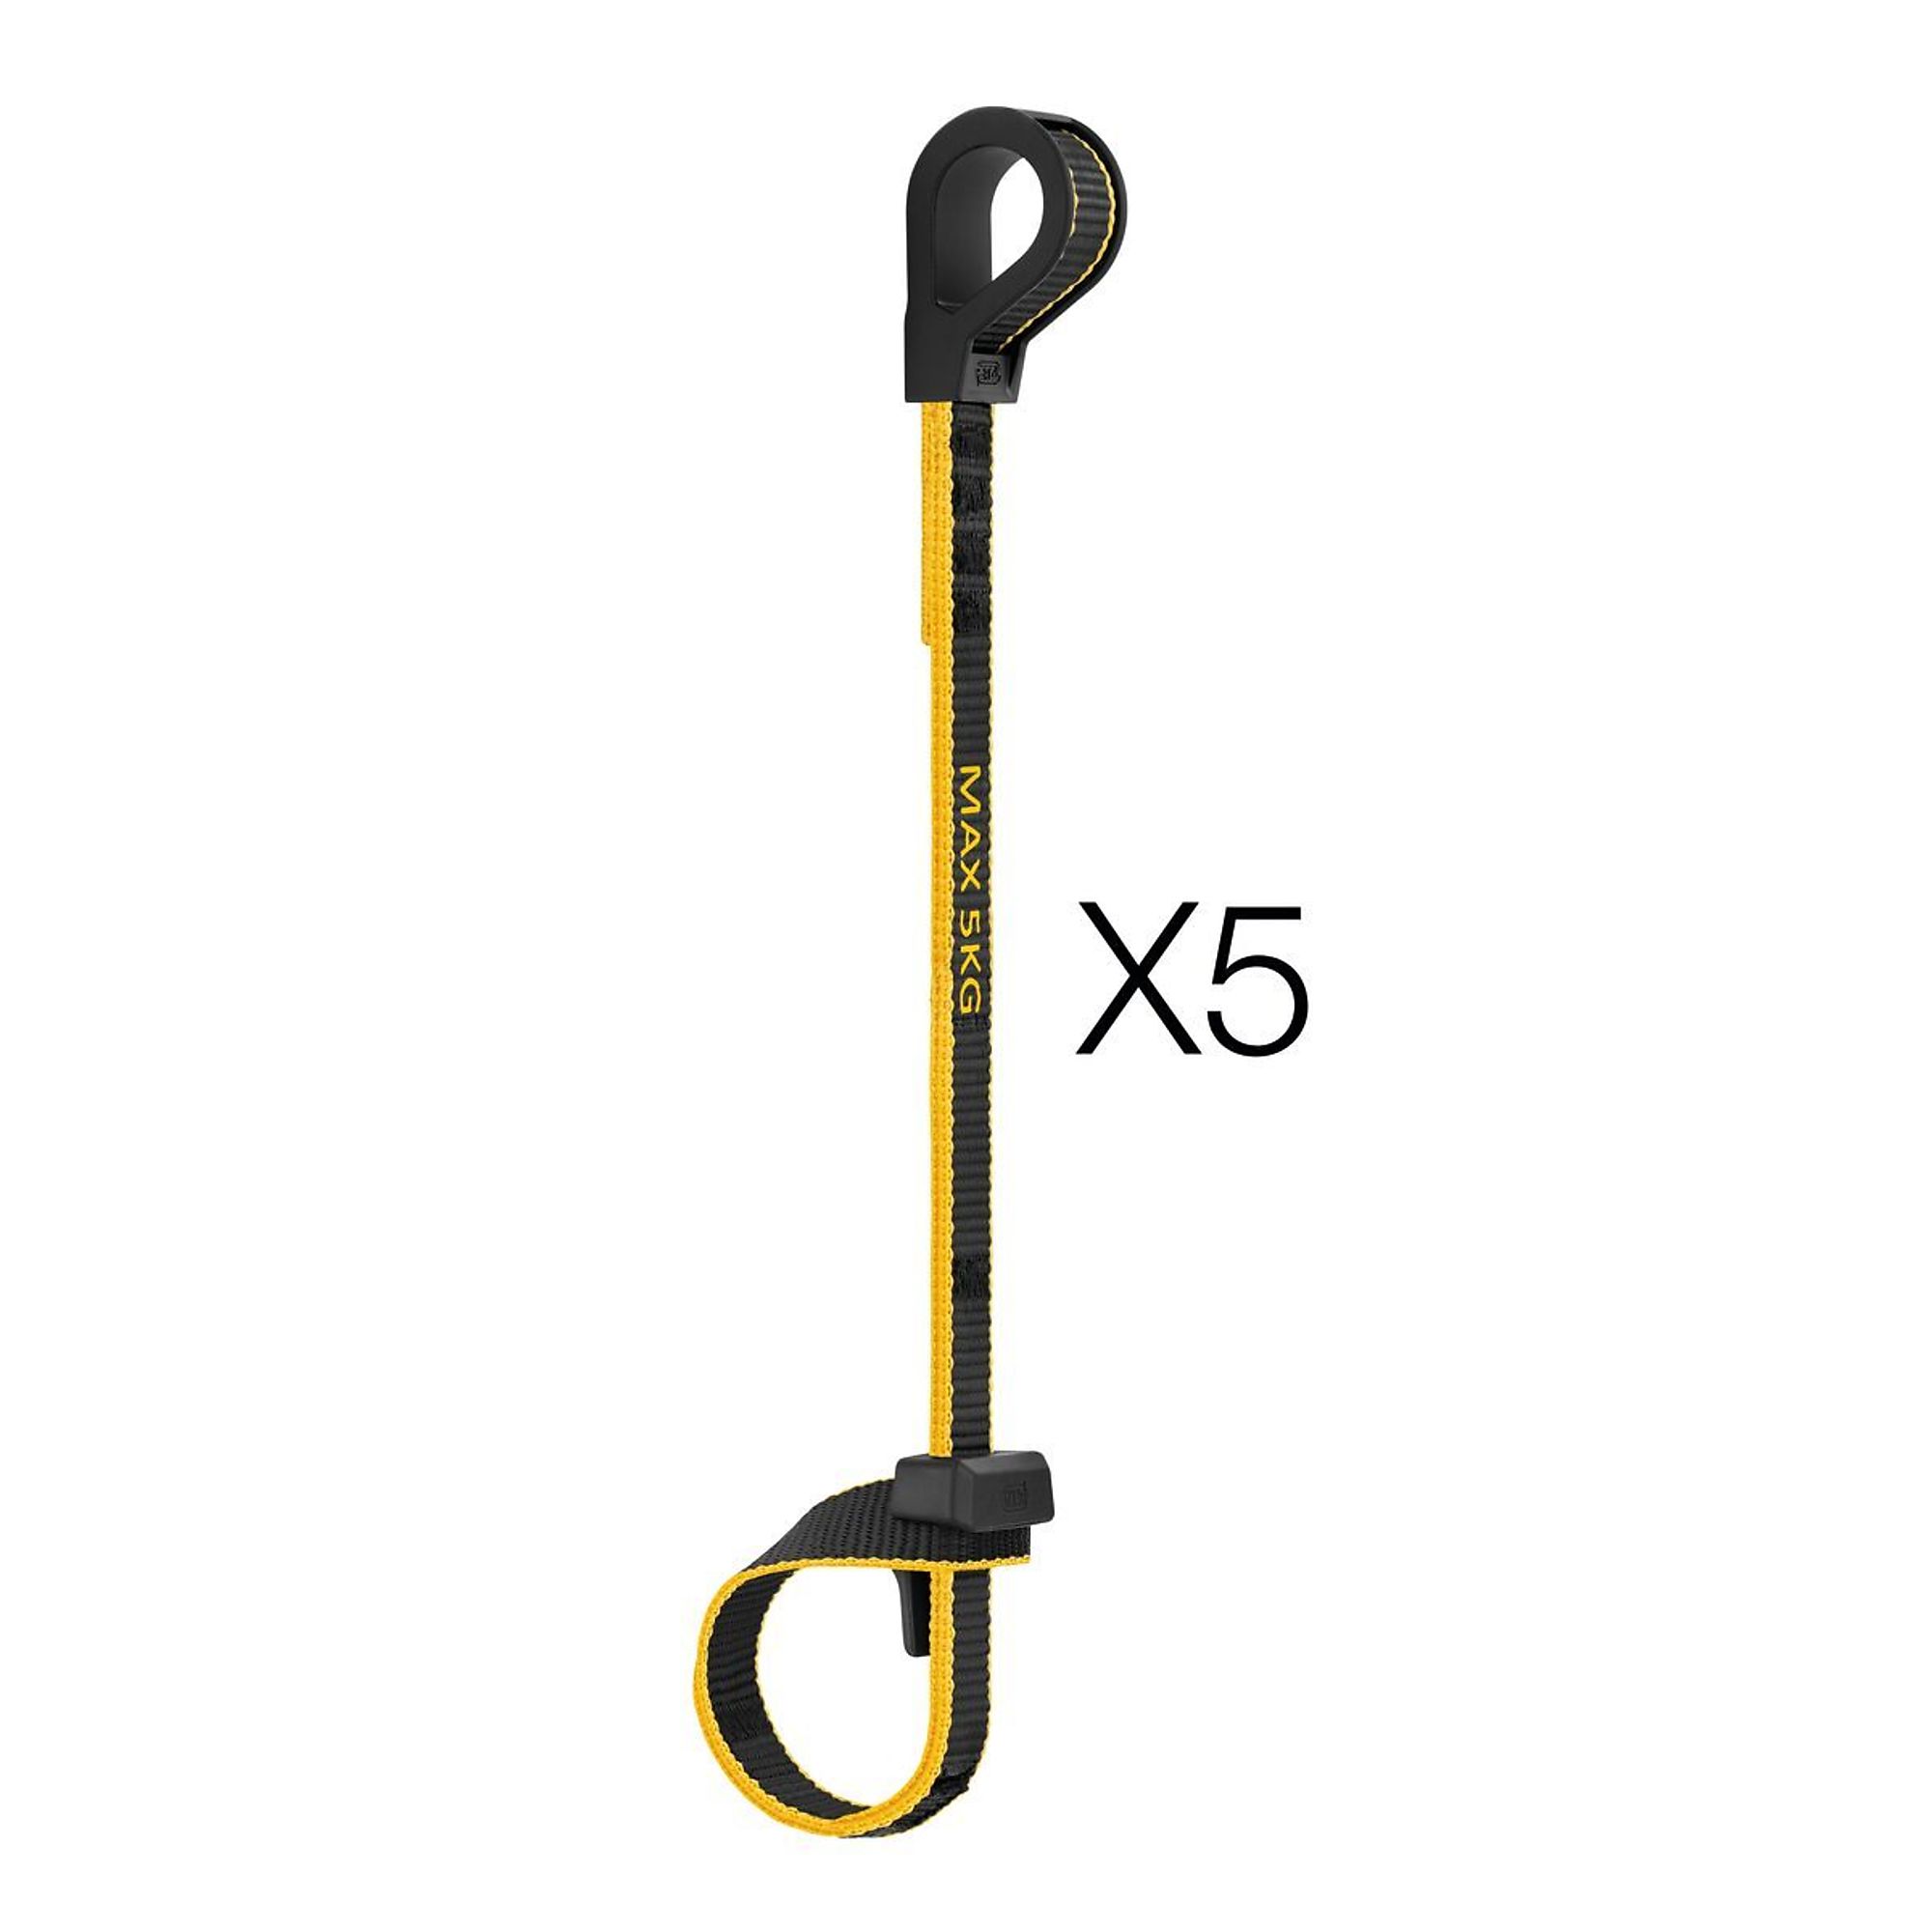 Petzl, TOOLINK L tool tether (5pk) with connection hole, Model S050CA00